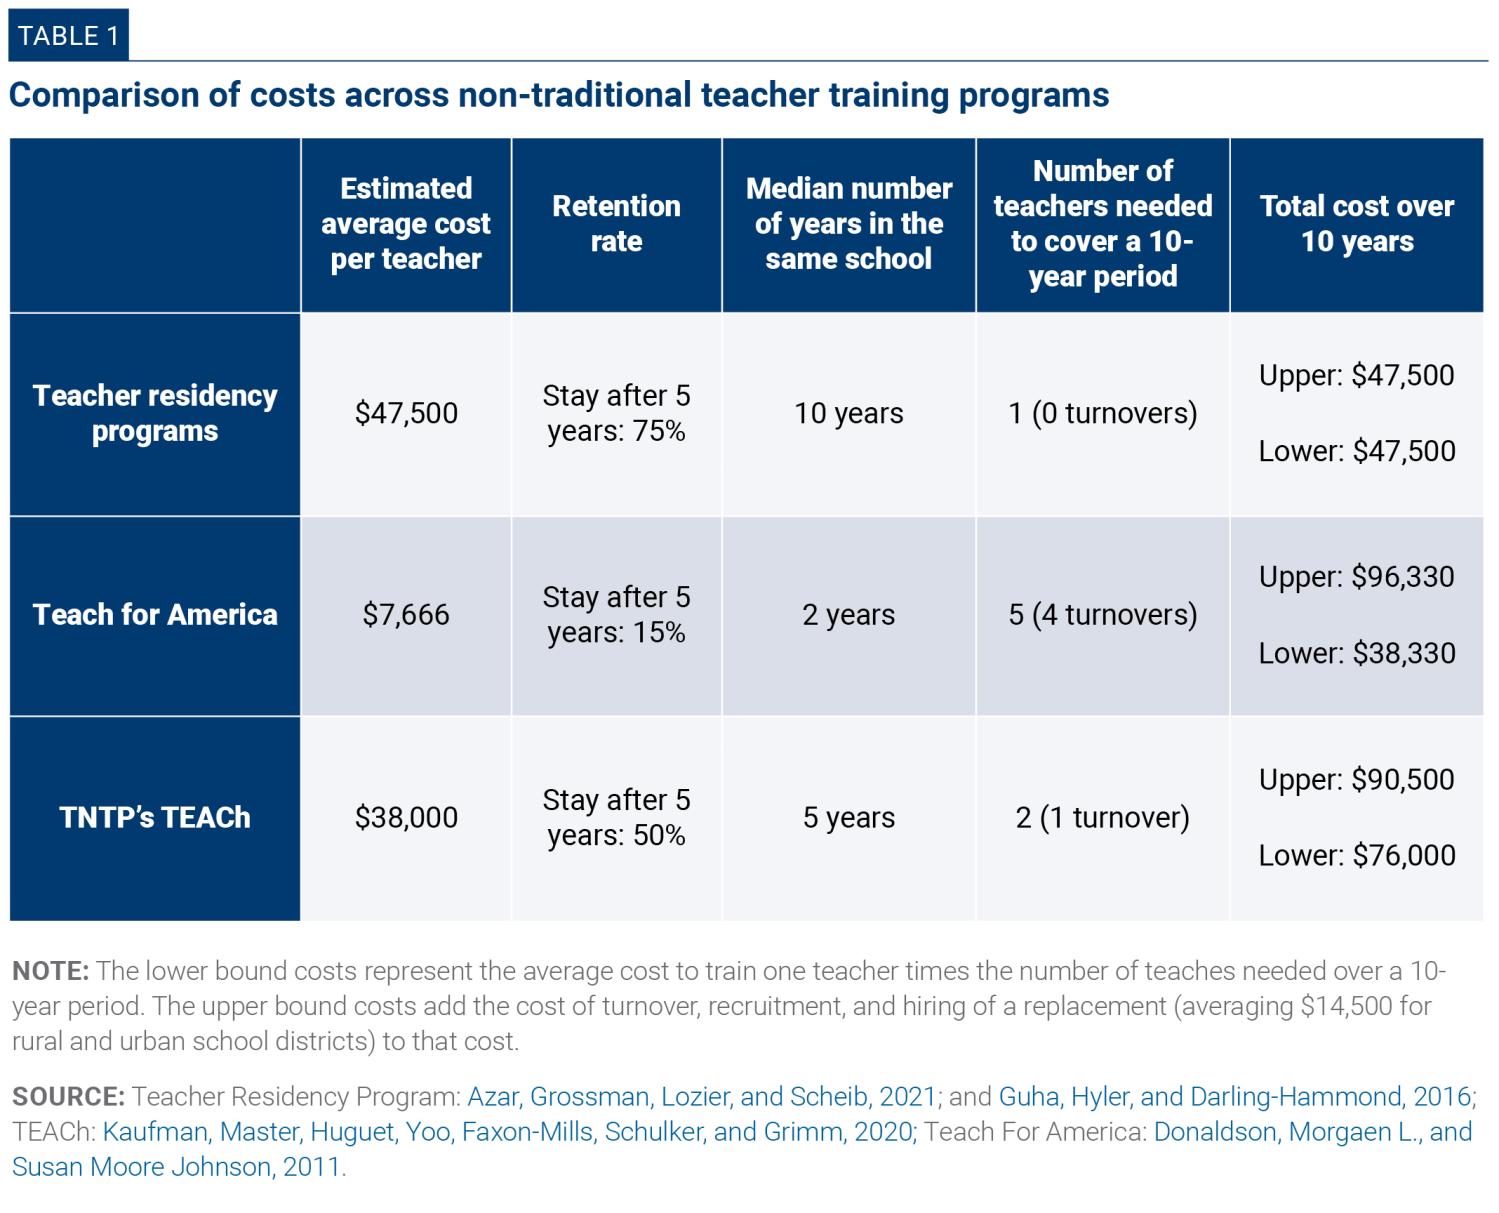 Comparison of costs across non-traditional teacher training programs